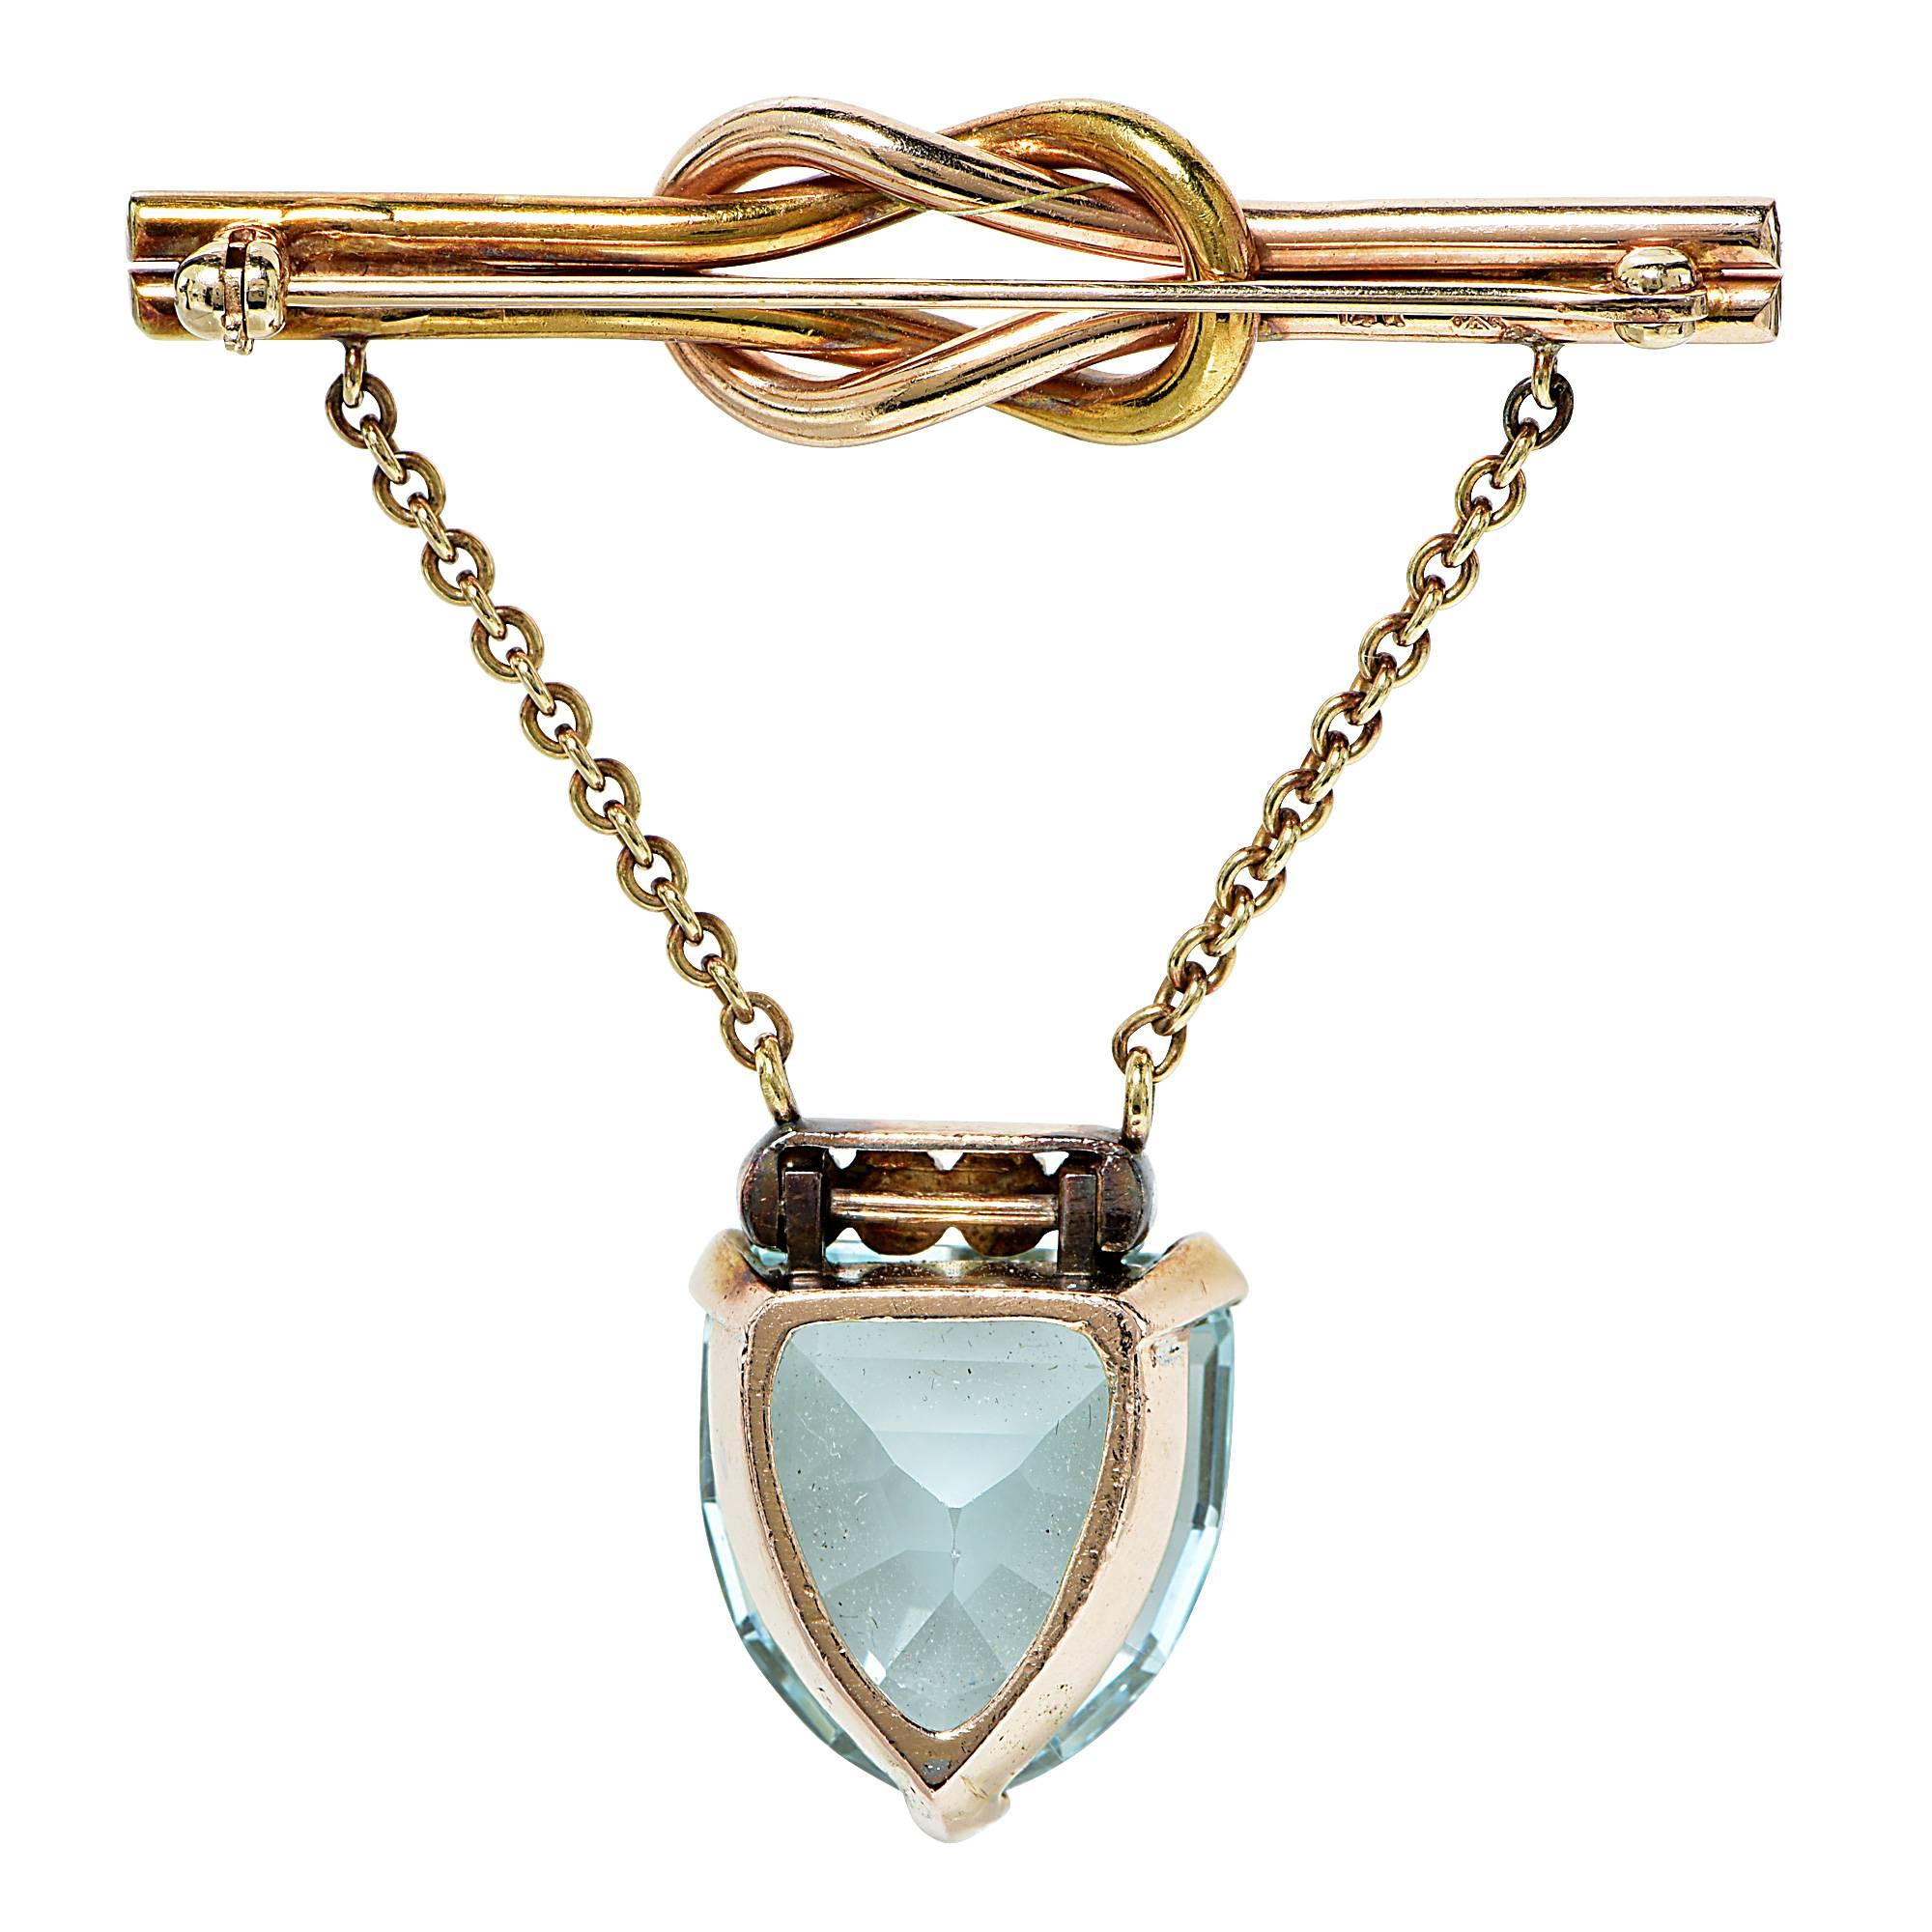 14k yellow and rose gold vintage brooch featuring a shield cut aquamarine weighing approximately 20cts accented by 4 round brilliant cut diamonds weighing approximately .30cts total, G color VS clarity.

Metal weight: 16.32 grams

This